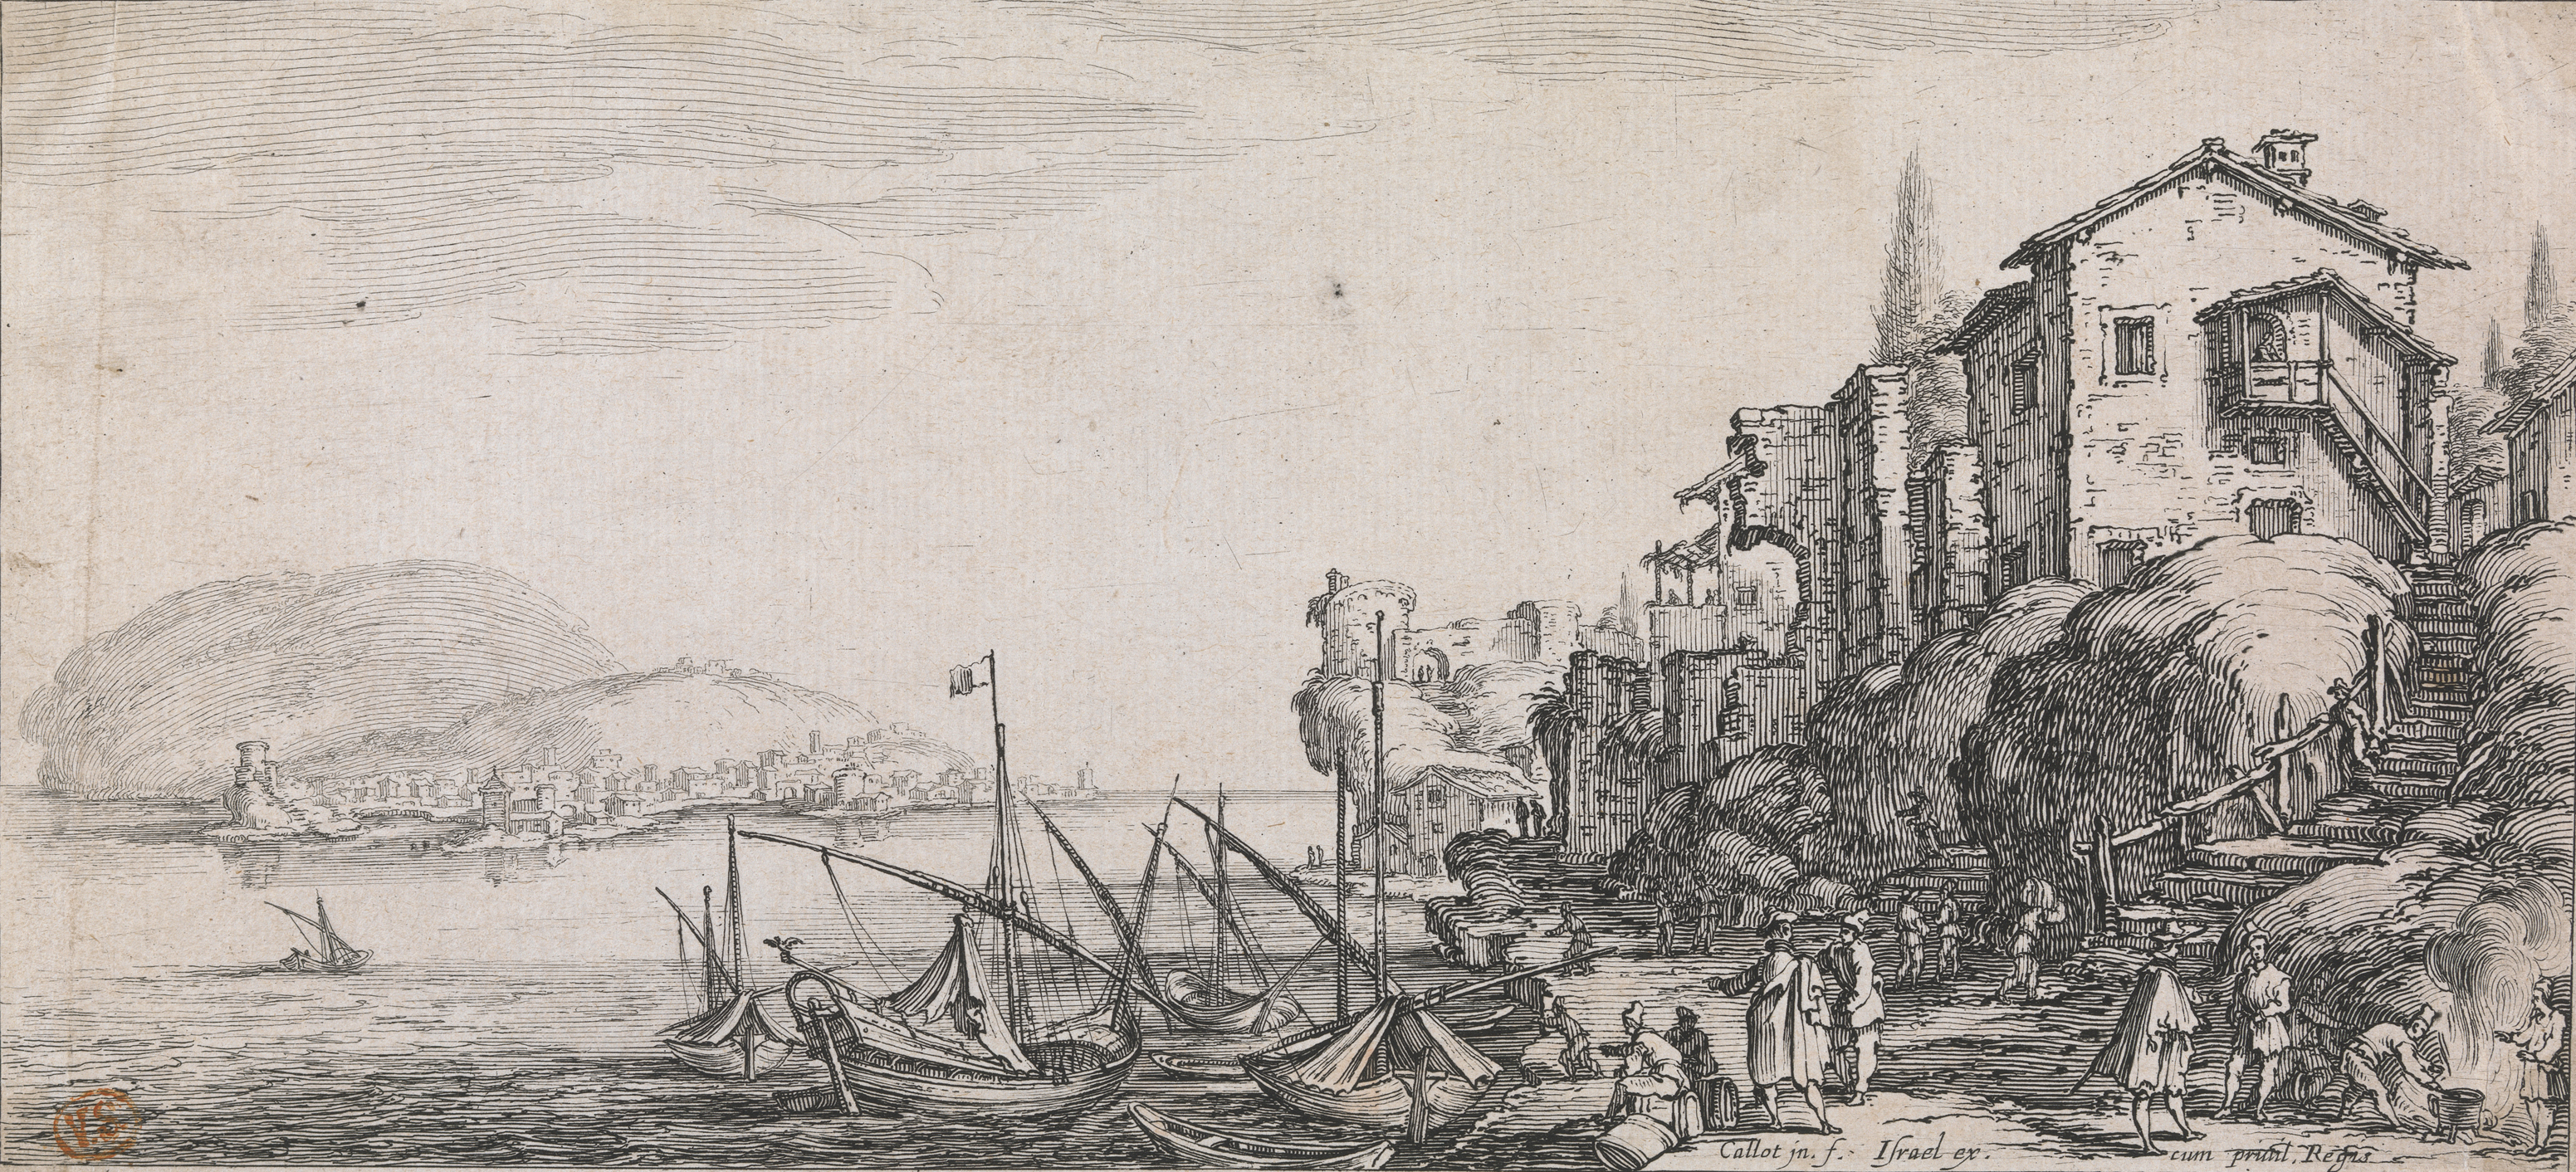 Jacques Callot, Kleine haven, 1630, Musea Brugge, 114 mm x 248 mm, inv. 0000.GRO6217.III, CC0, beeld artinflanders.be